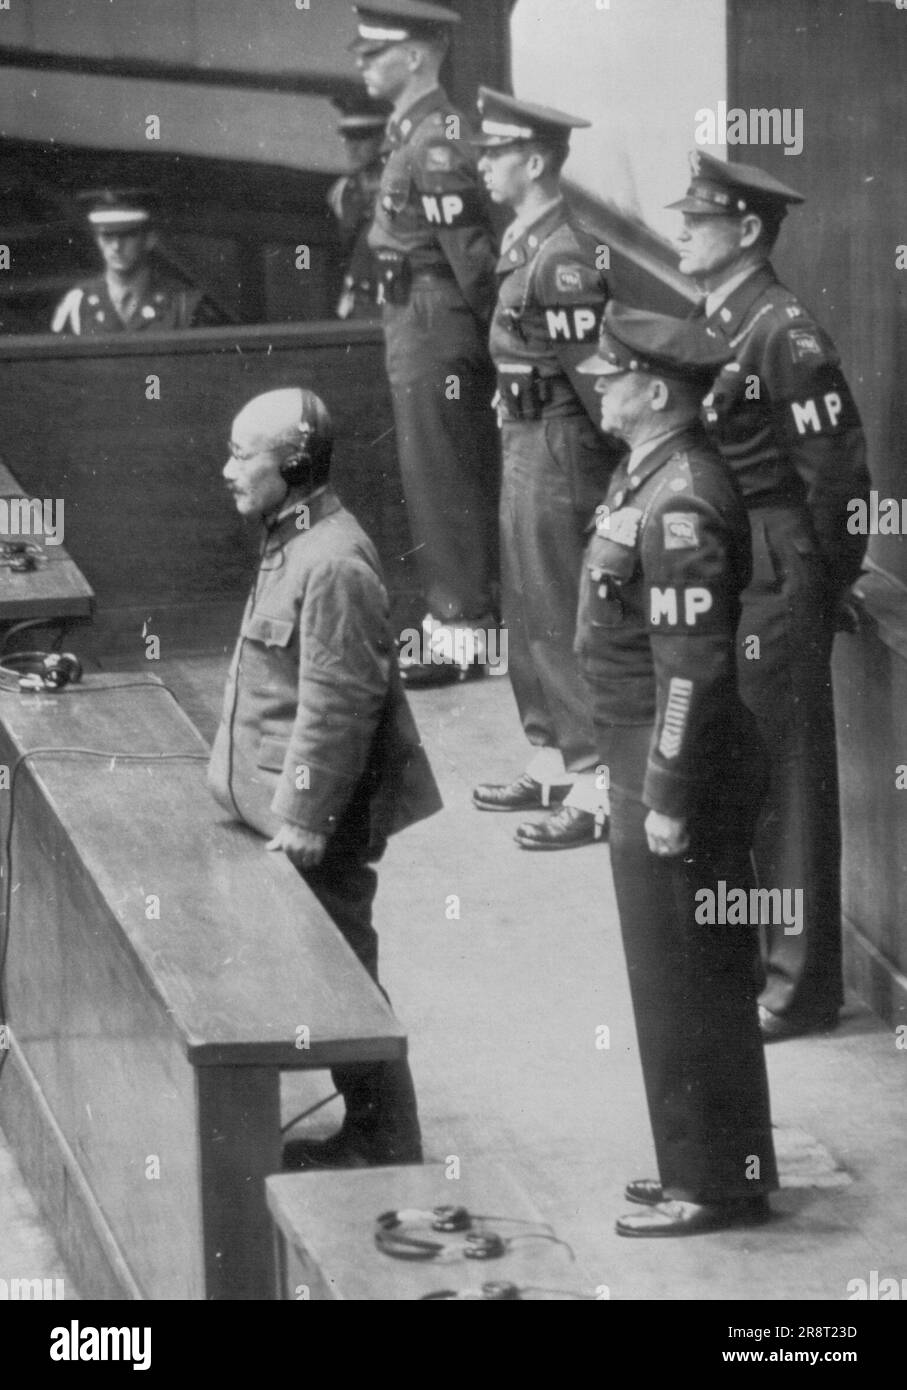 Sentence Passed -- Hideki Tojo, former Prime Minister of Japan and war leader stands alone in dock as his sentence is read by the International Military Tribunal, Far East in Tokyo Nov. 12. At rear is Lt. Col. S.Kenworthy, who is responsible for the prisoners. November 29, 1948. (Photo by Associated Press Photo). Stock Photo